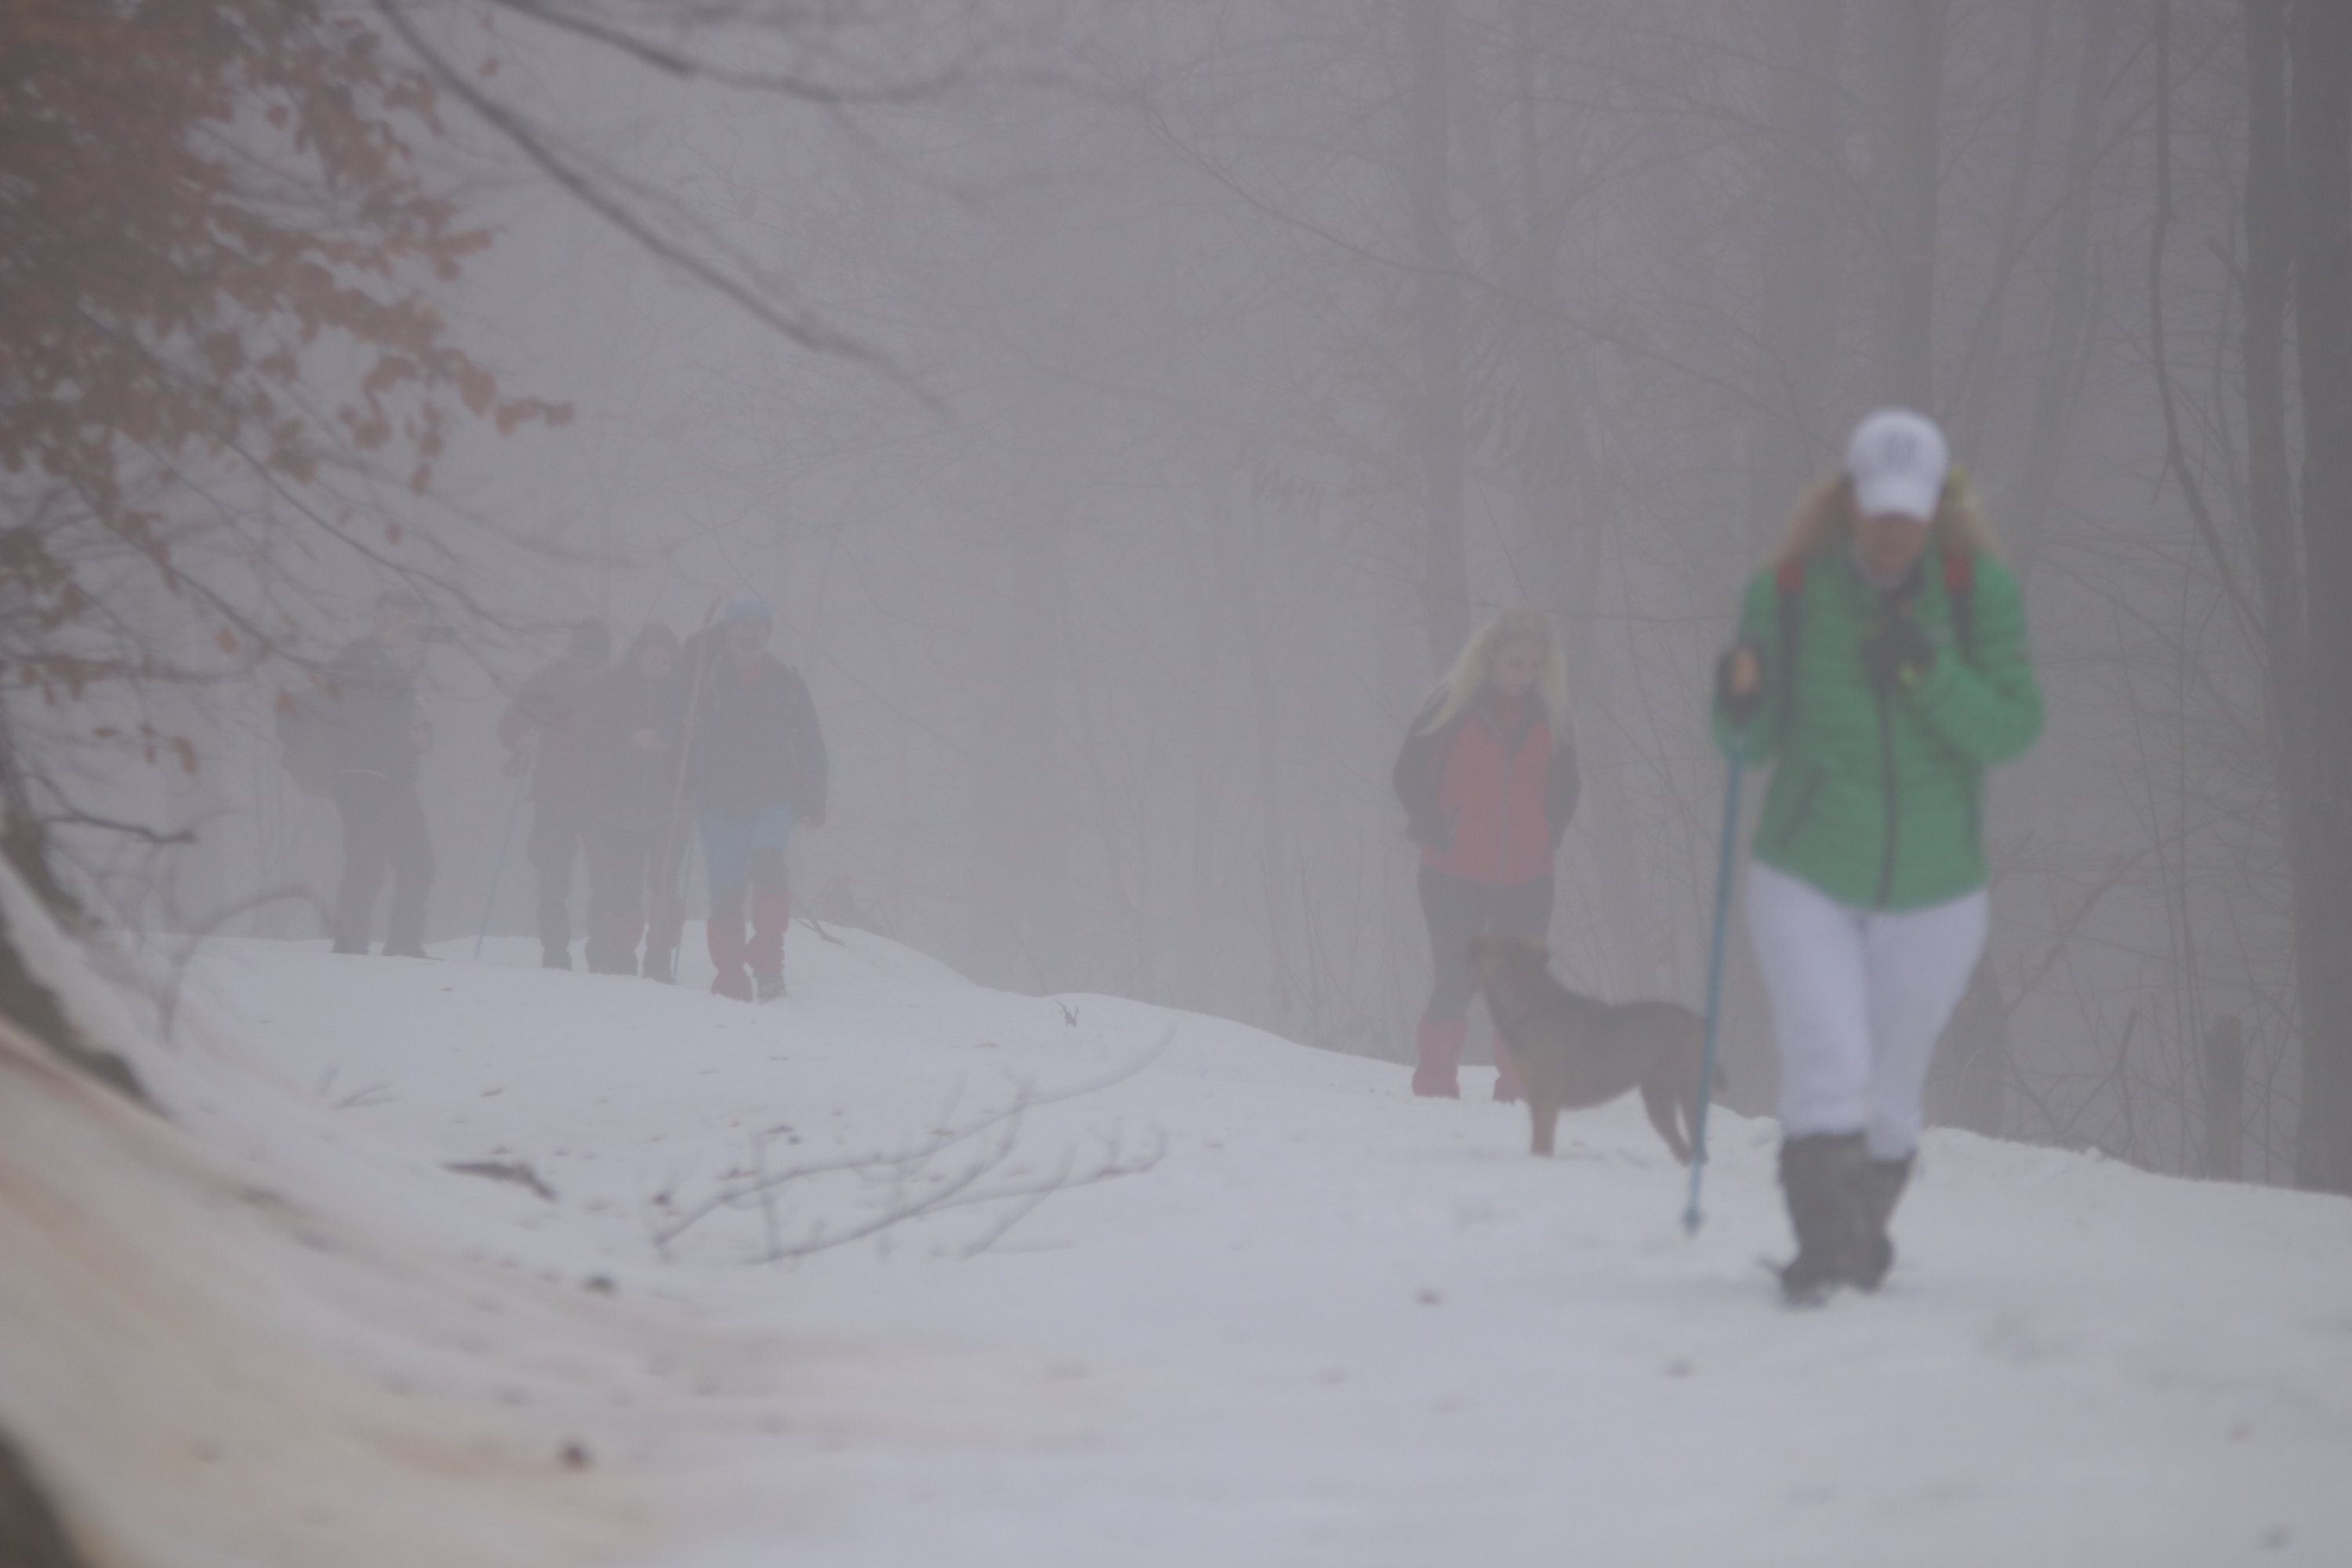 Trekking through fog along the 16-kilometer Kurtköy-Güneyköy part of the 801-kilometer "Sufi Trail" that stretches from Istanbul to Konya in central Turkey and takes 40 days to complete, Feb. 13, 2022. (AA Photo)